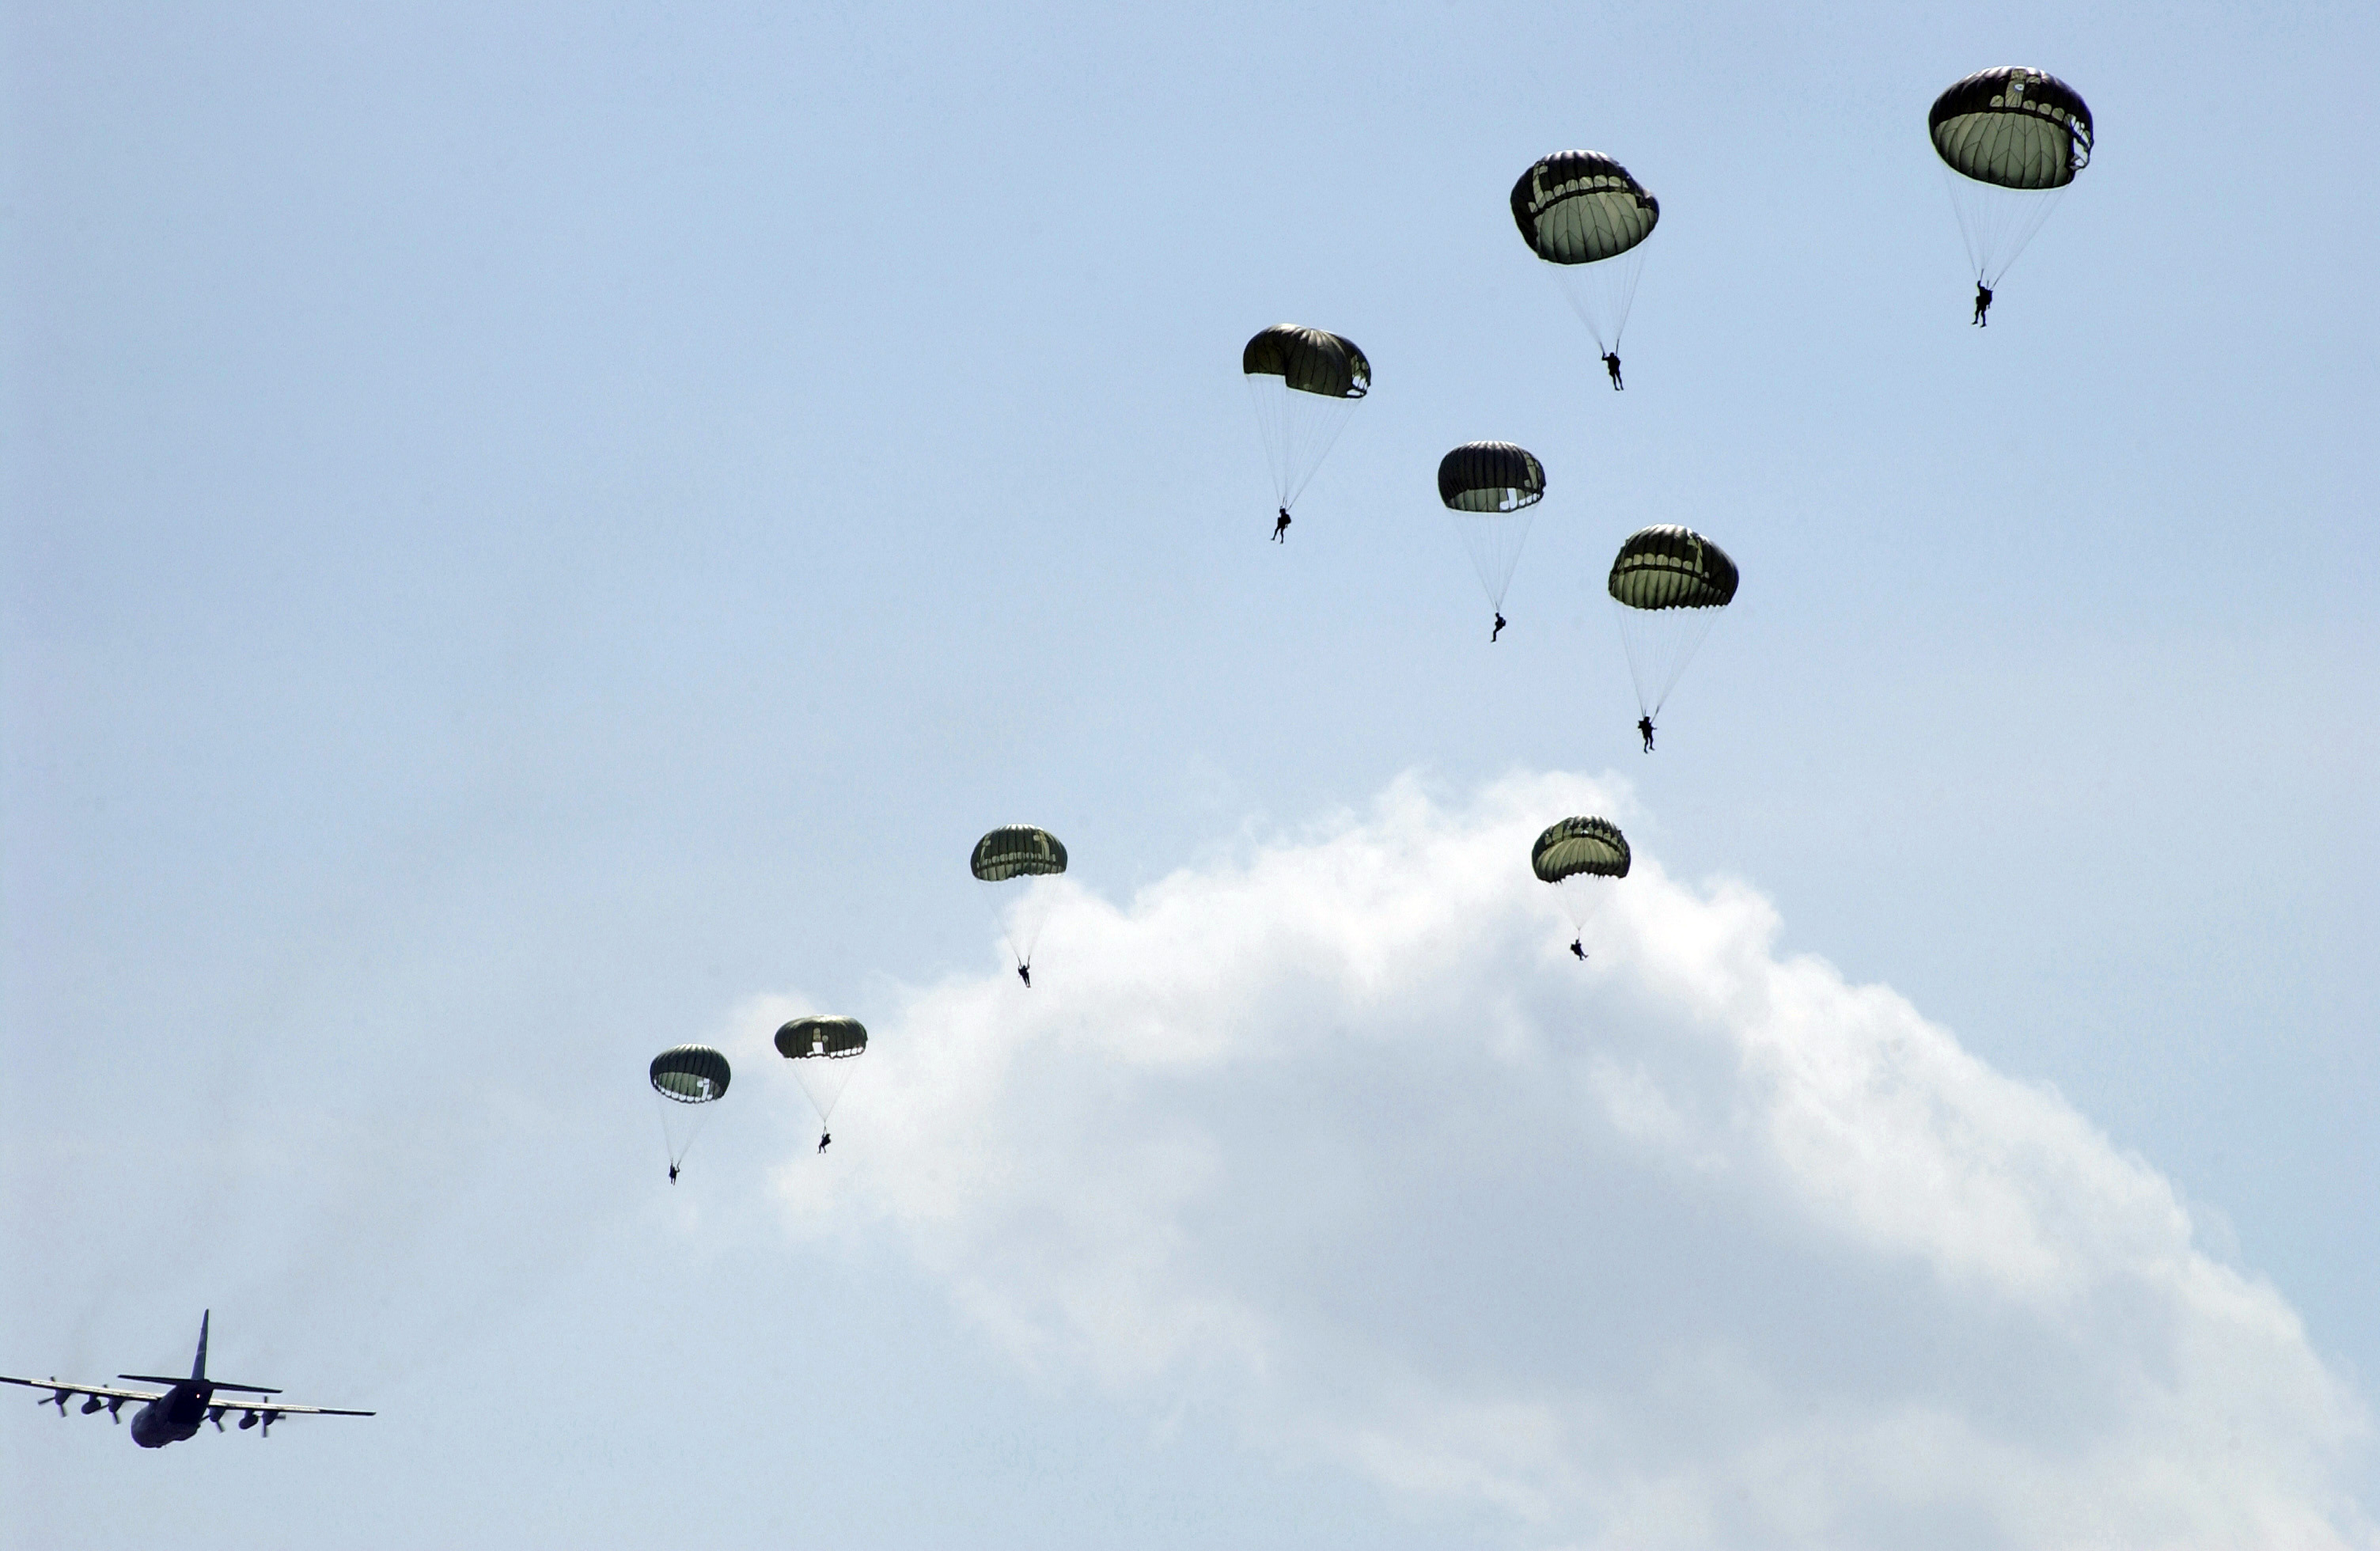 File:US Air Force (USAF) Paratroopers jump from a USAF C-130 Hercules  aircraft during a